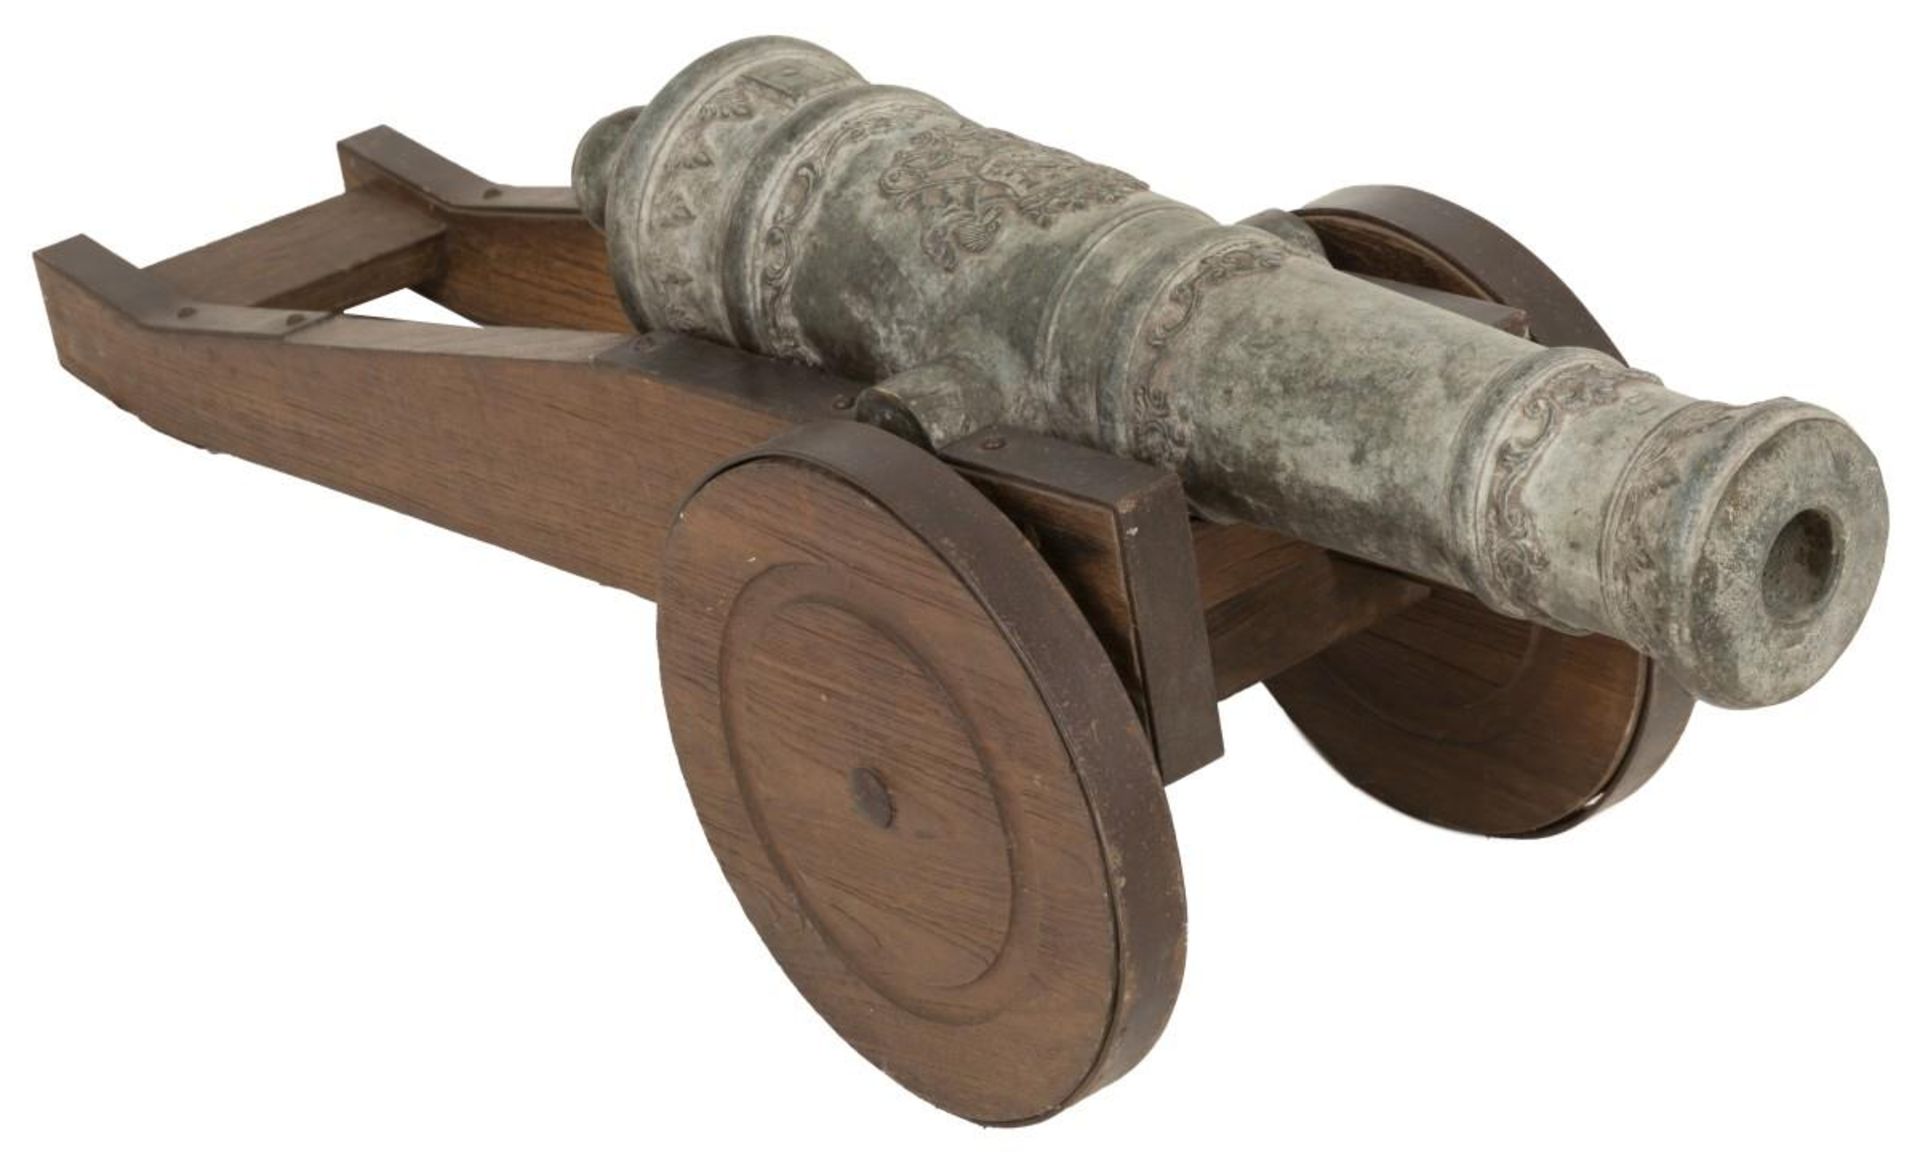 A bronze replica of a ships gun of the Republic of the 7 United Low Countries.